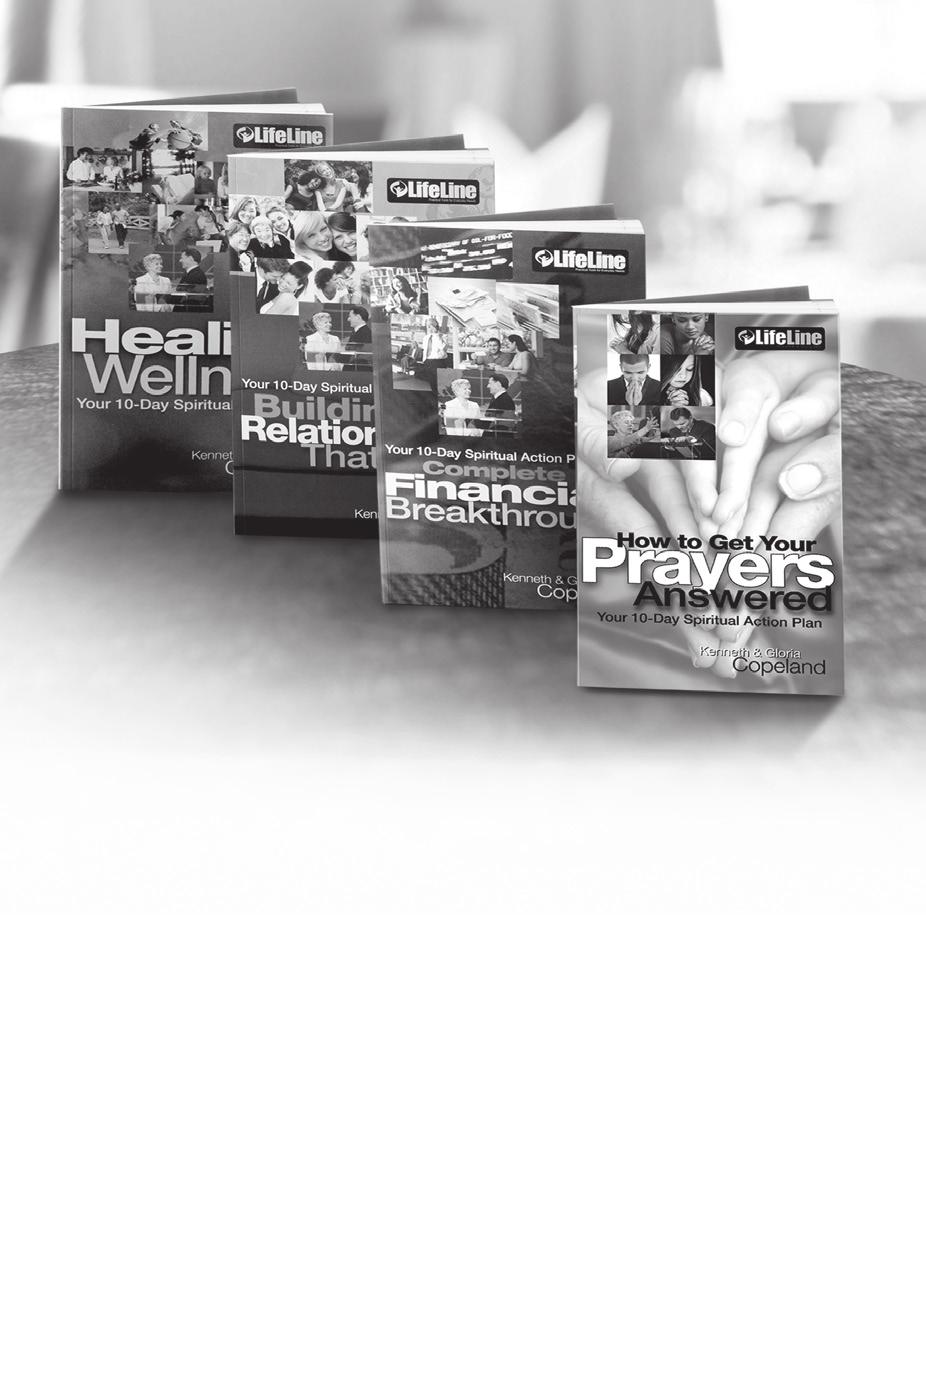 more help, more answers, MORE OF GOD S PLAN FOR YOU! The LifeLine Series More than 100,000 copies in print.